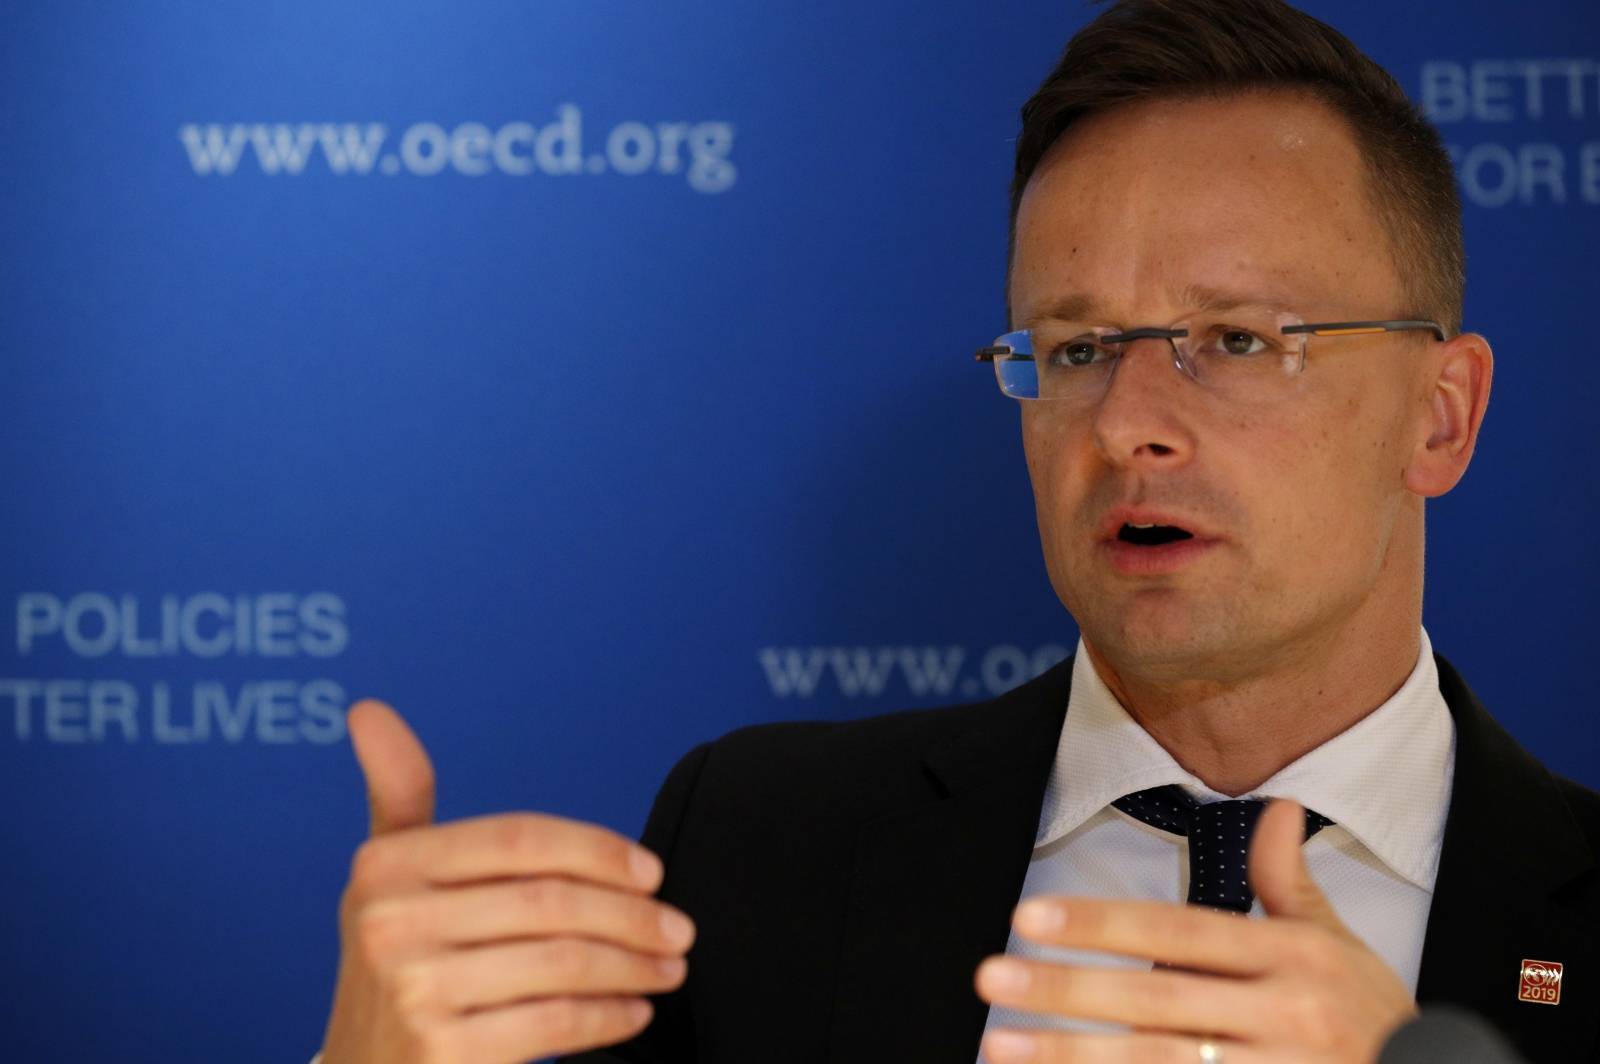 Hungarian foreign minister Peter Szijjarto speaks to Reuters days before the European elections at the OECD headquarters in Paris